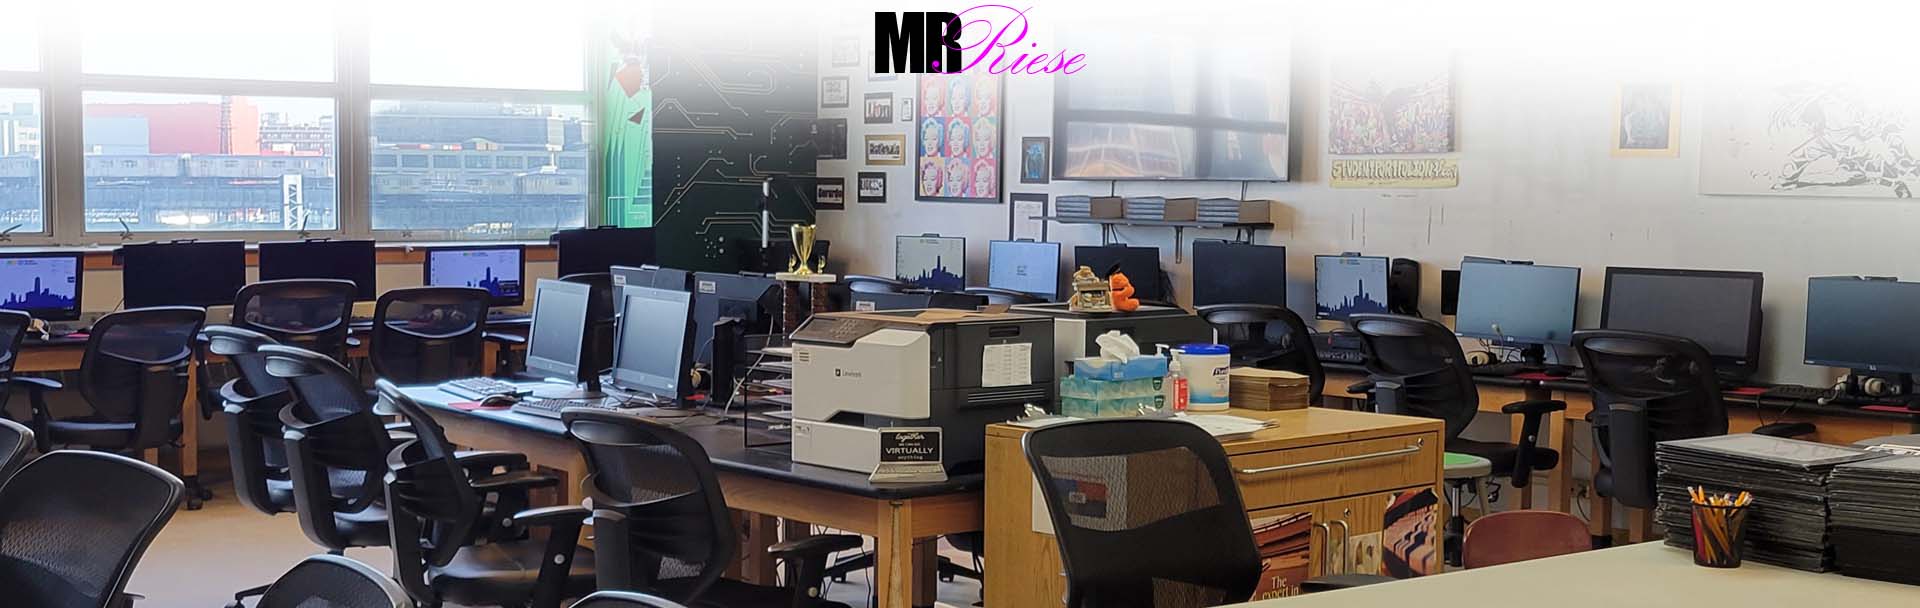 Spot The Difference Photoshop Project | Mr. Riese